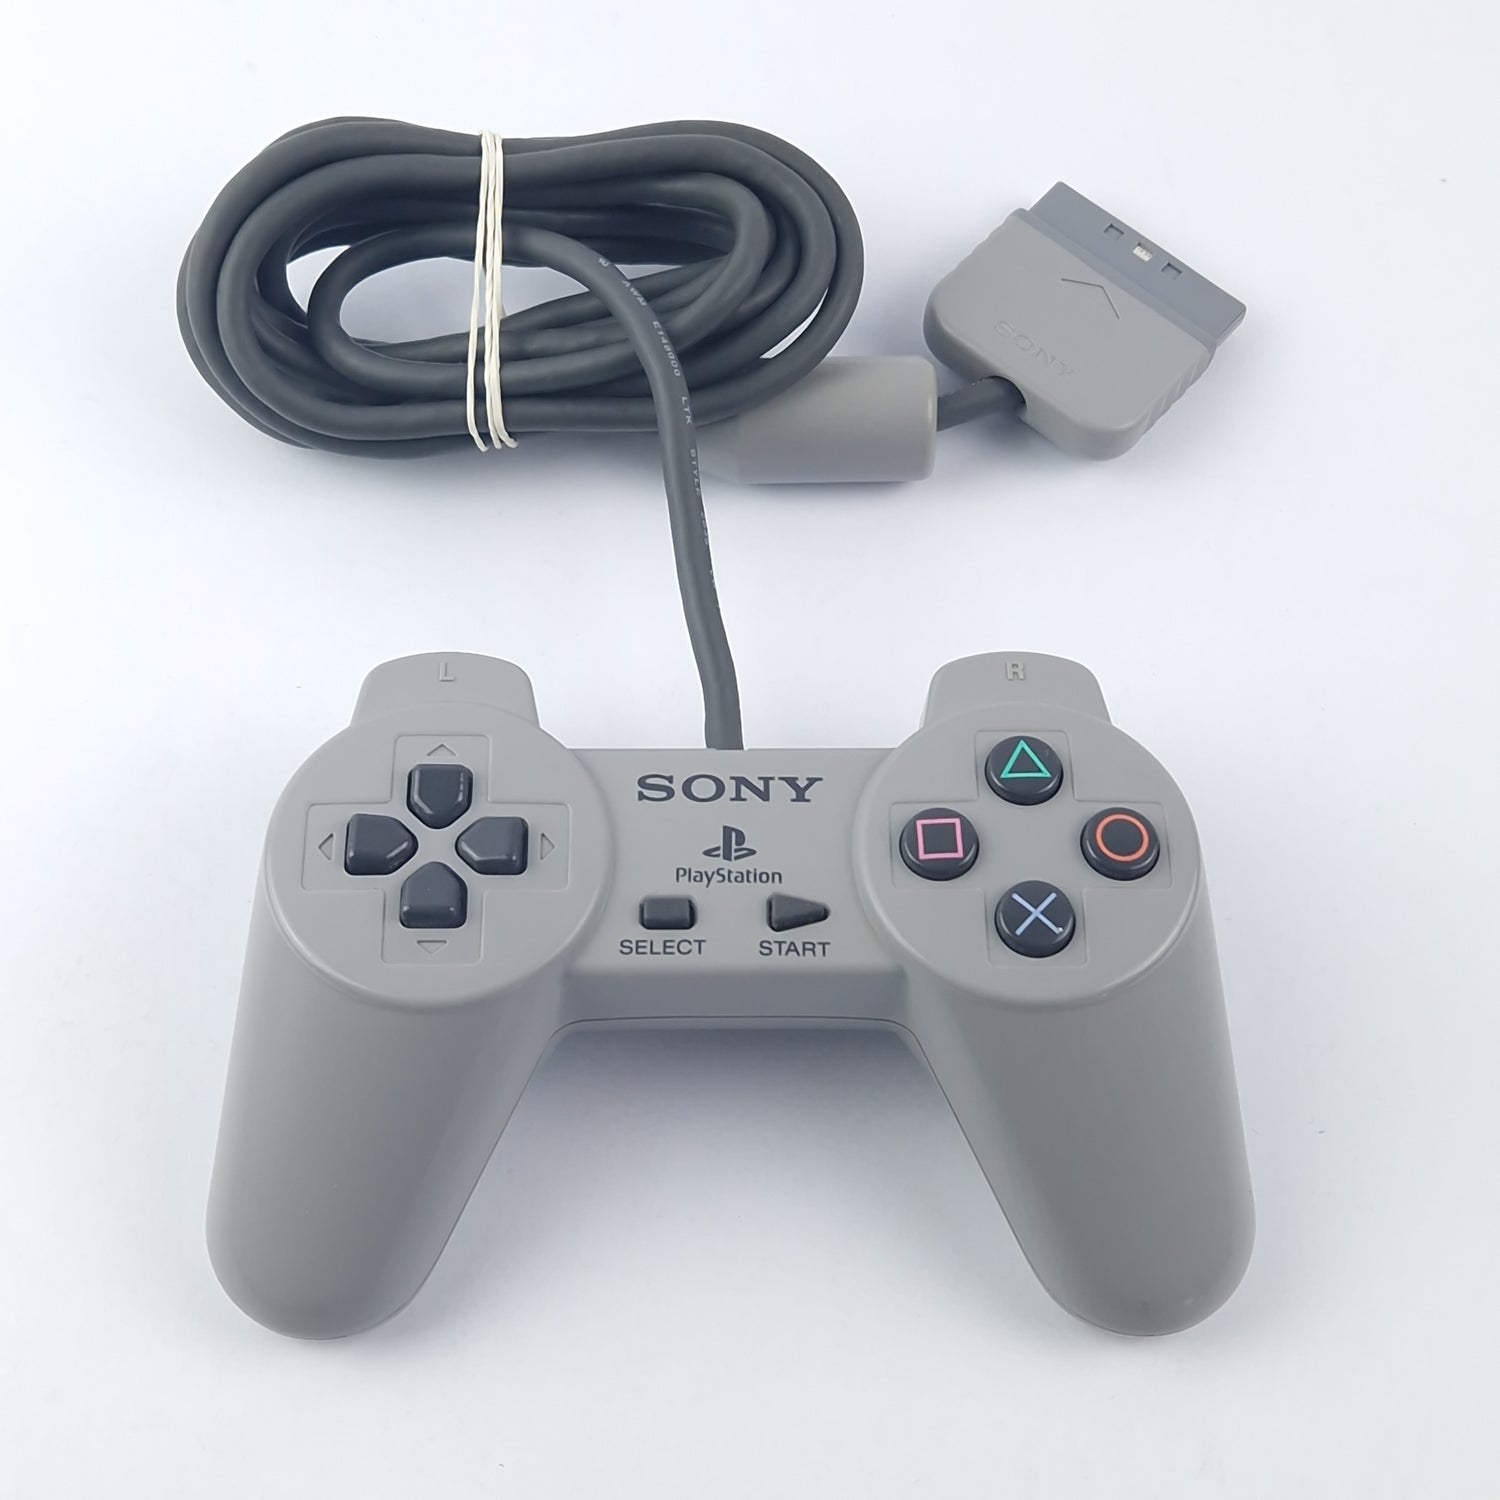 Playstation 1 console with controller and connection cables - Sony PS1 Console PAL